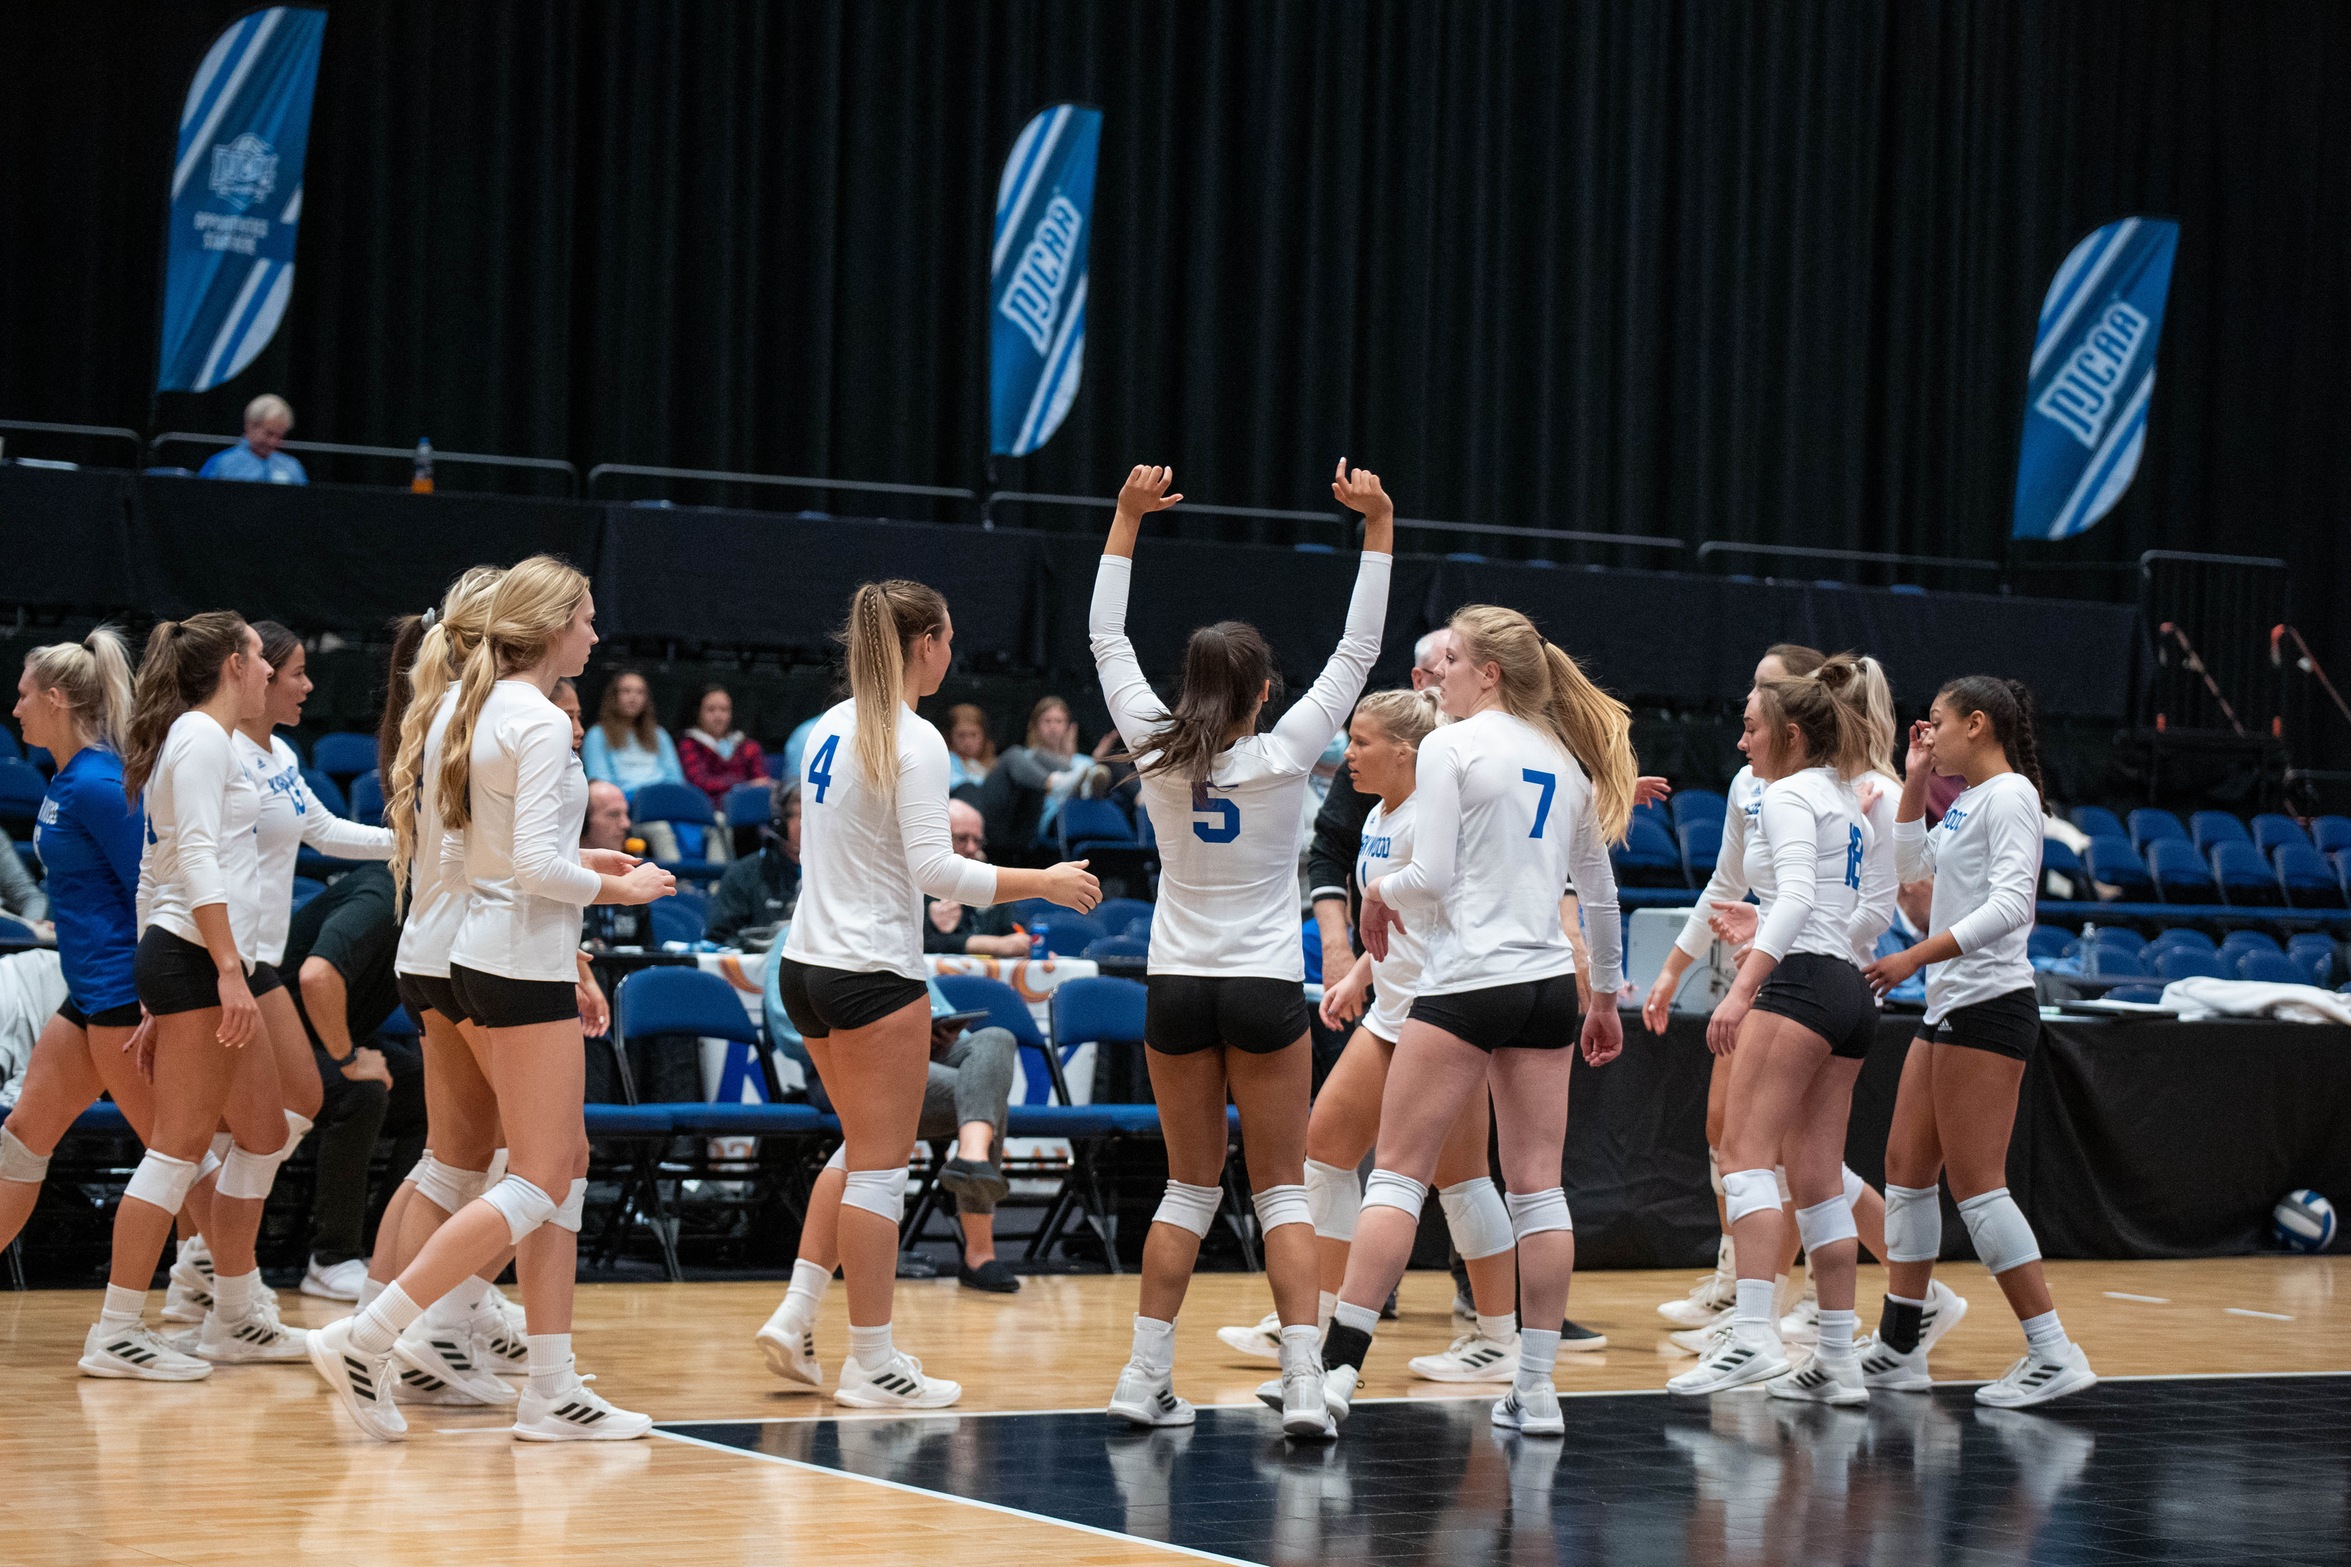 KCC VOLLEYBALL EYES 5TH PLACE AT NATIONALS